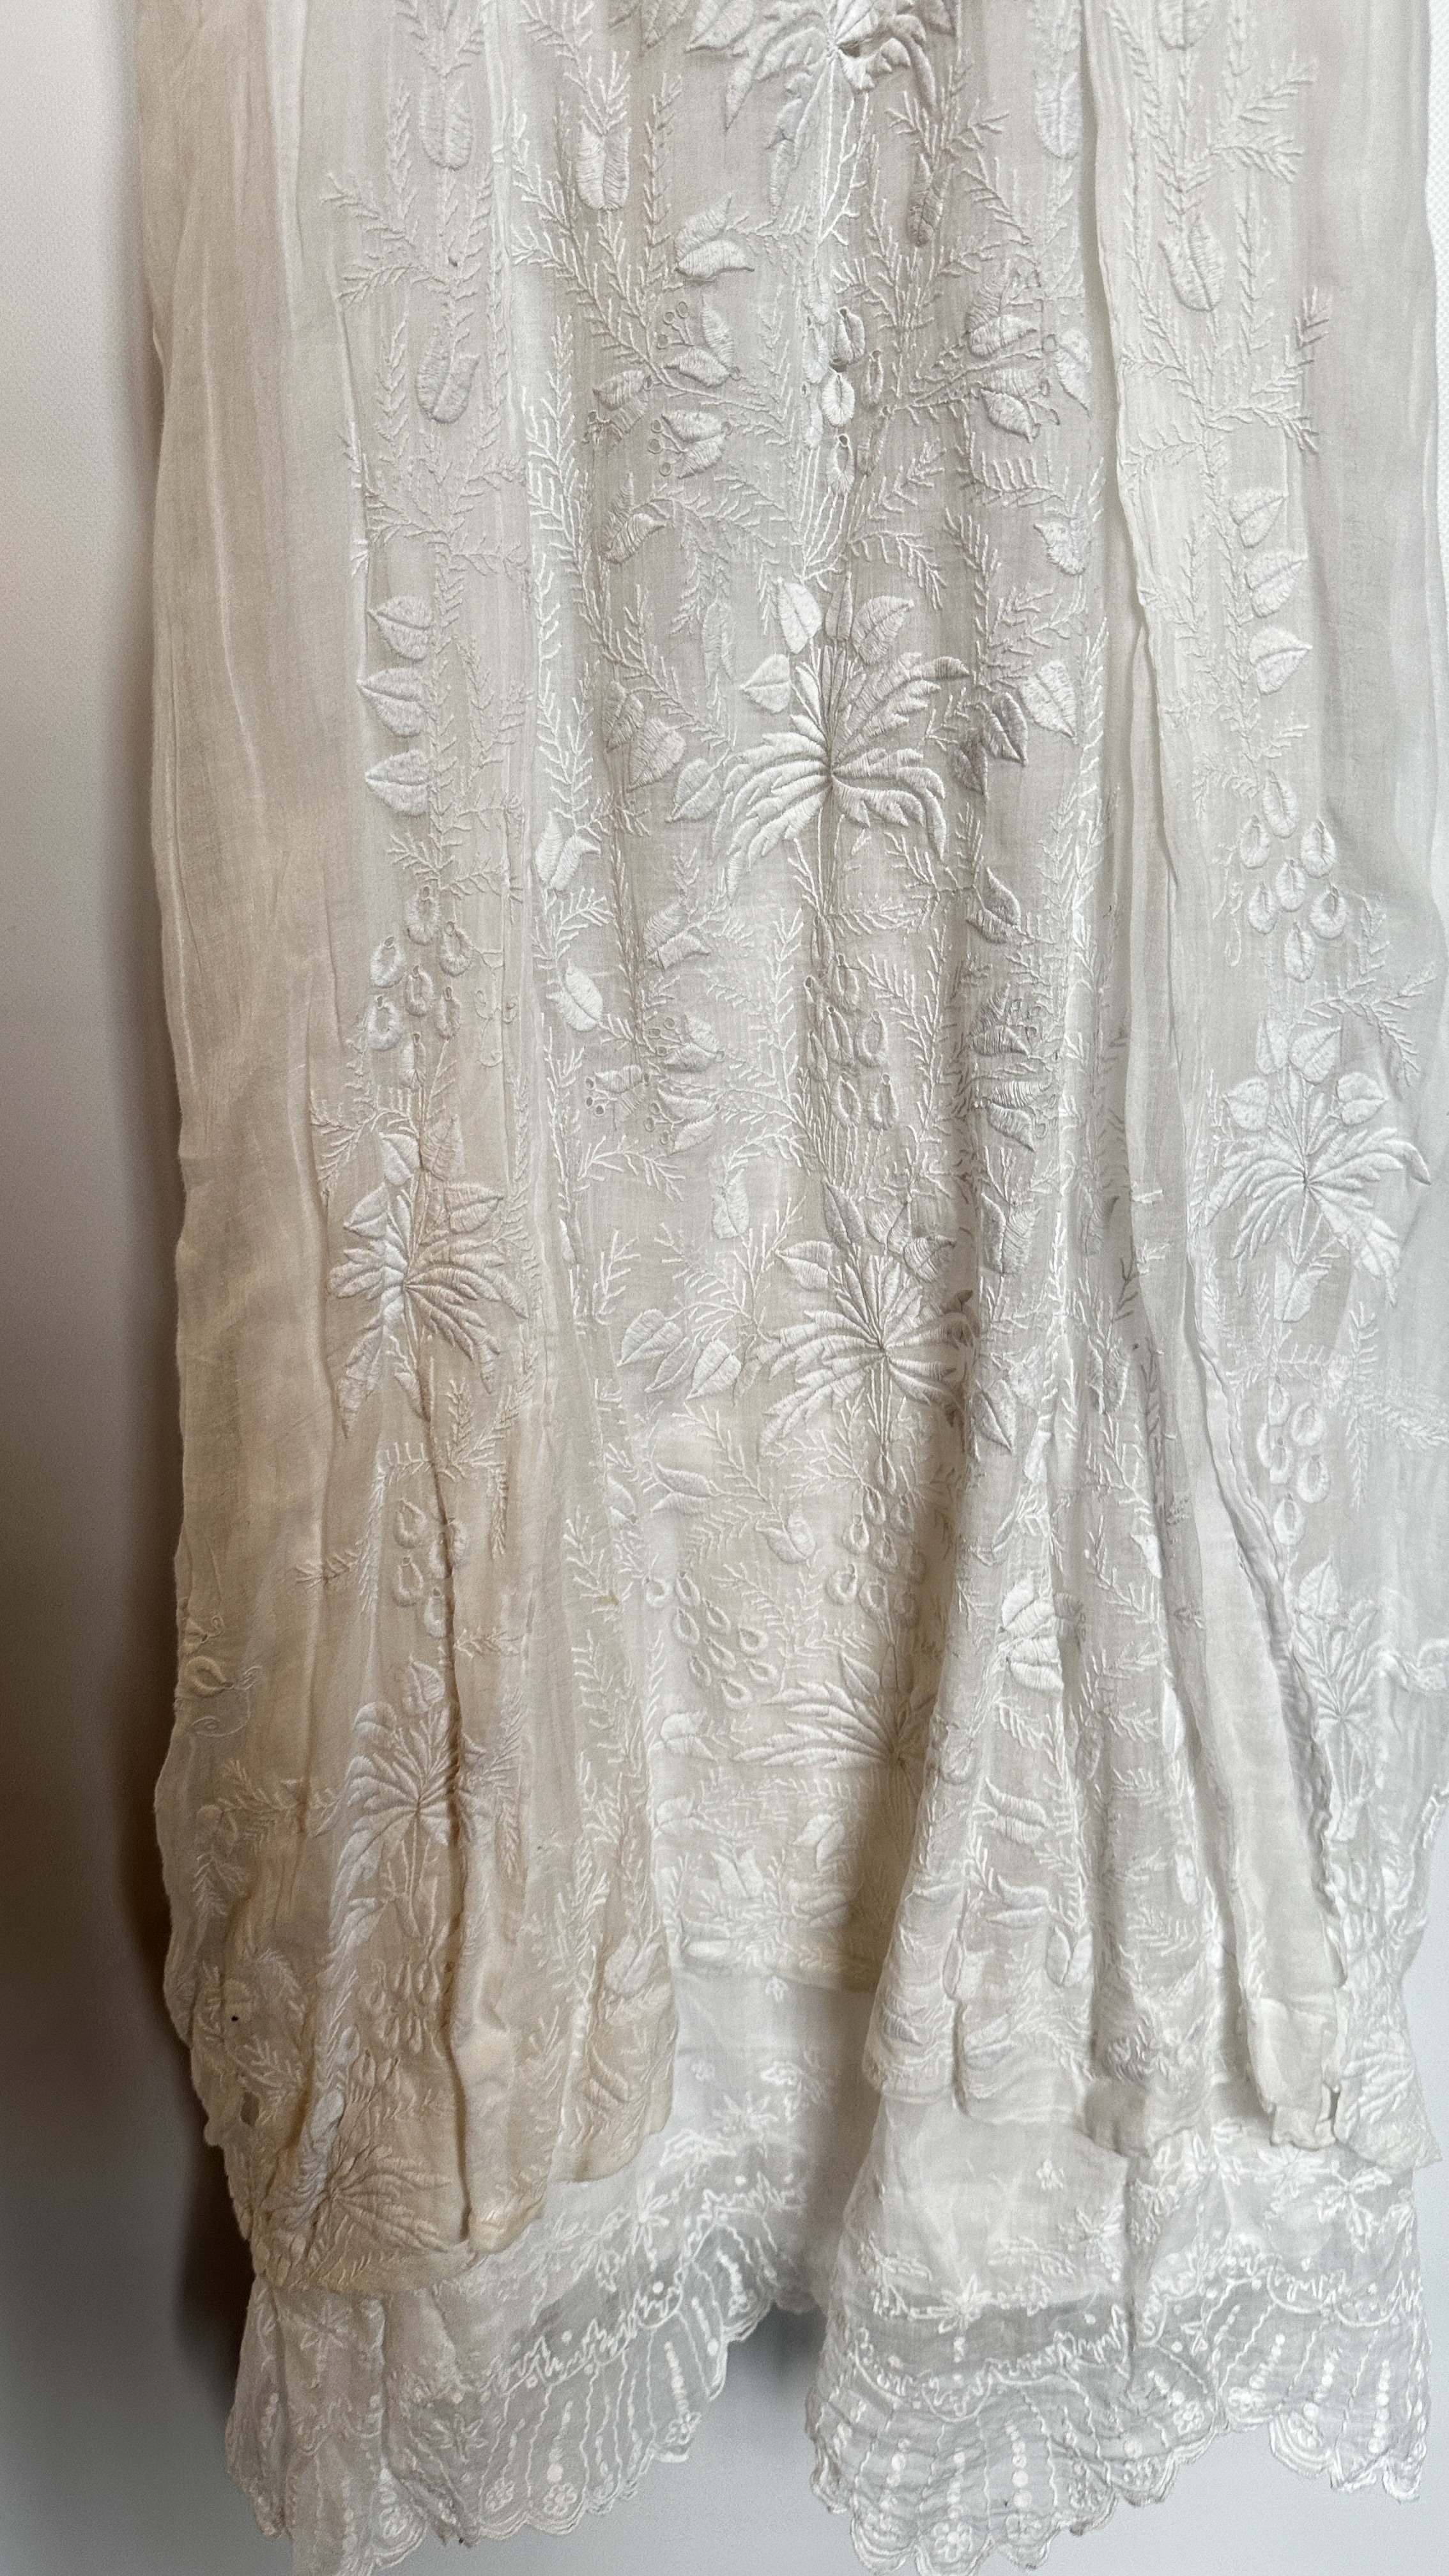 FINE WHITE COTTON EDWARDIAN DRESS, ALL OVER EMBROIDERY, EMPIRE LINE, PUFFED SLEEVES - A/F CONDITION, - Image 7 of 20